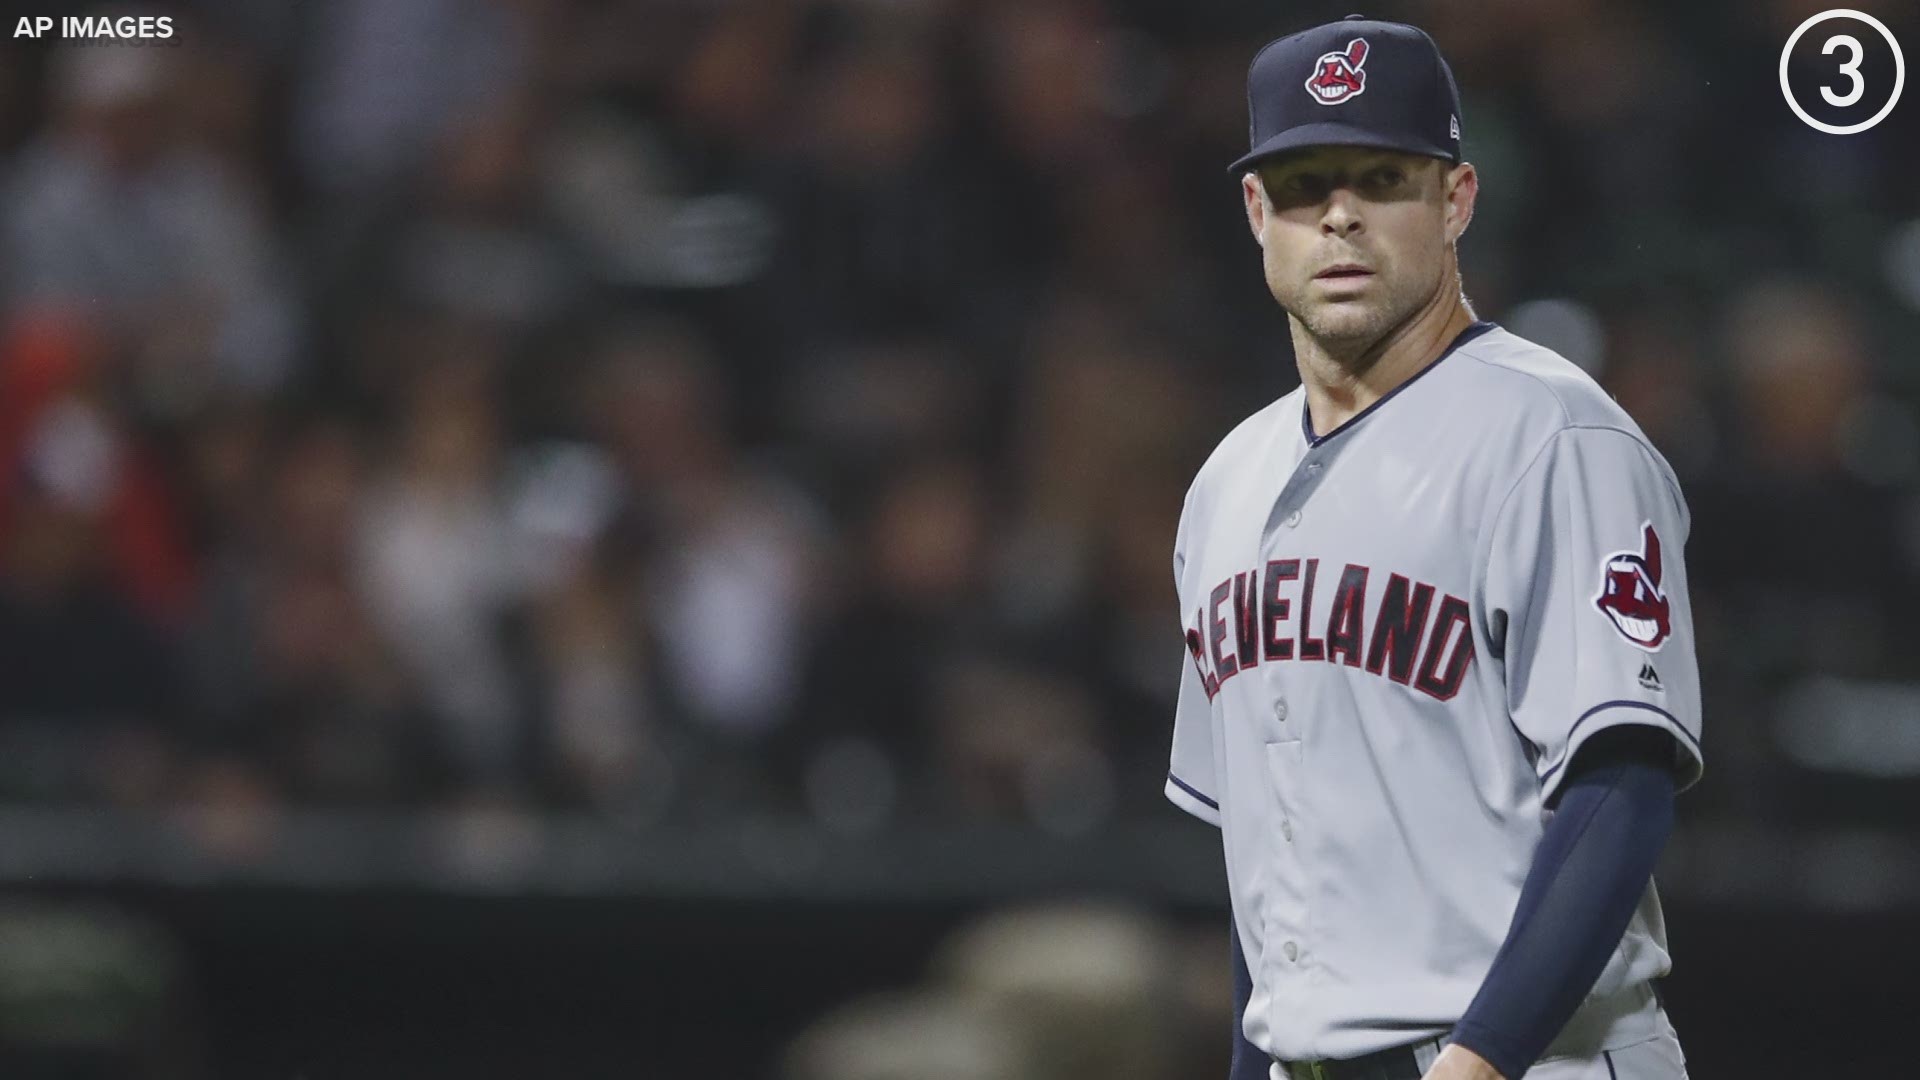 Thank you, Cleveland!  In an essay published in The Players' Tribune, Corey Kluber thanked the city of Cleveland for his 10 seasons with the Indians.